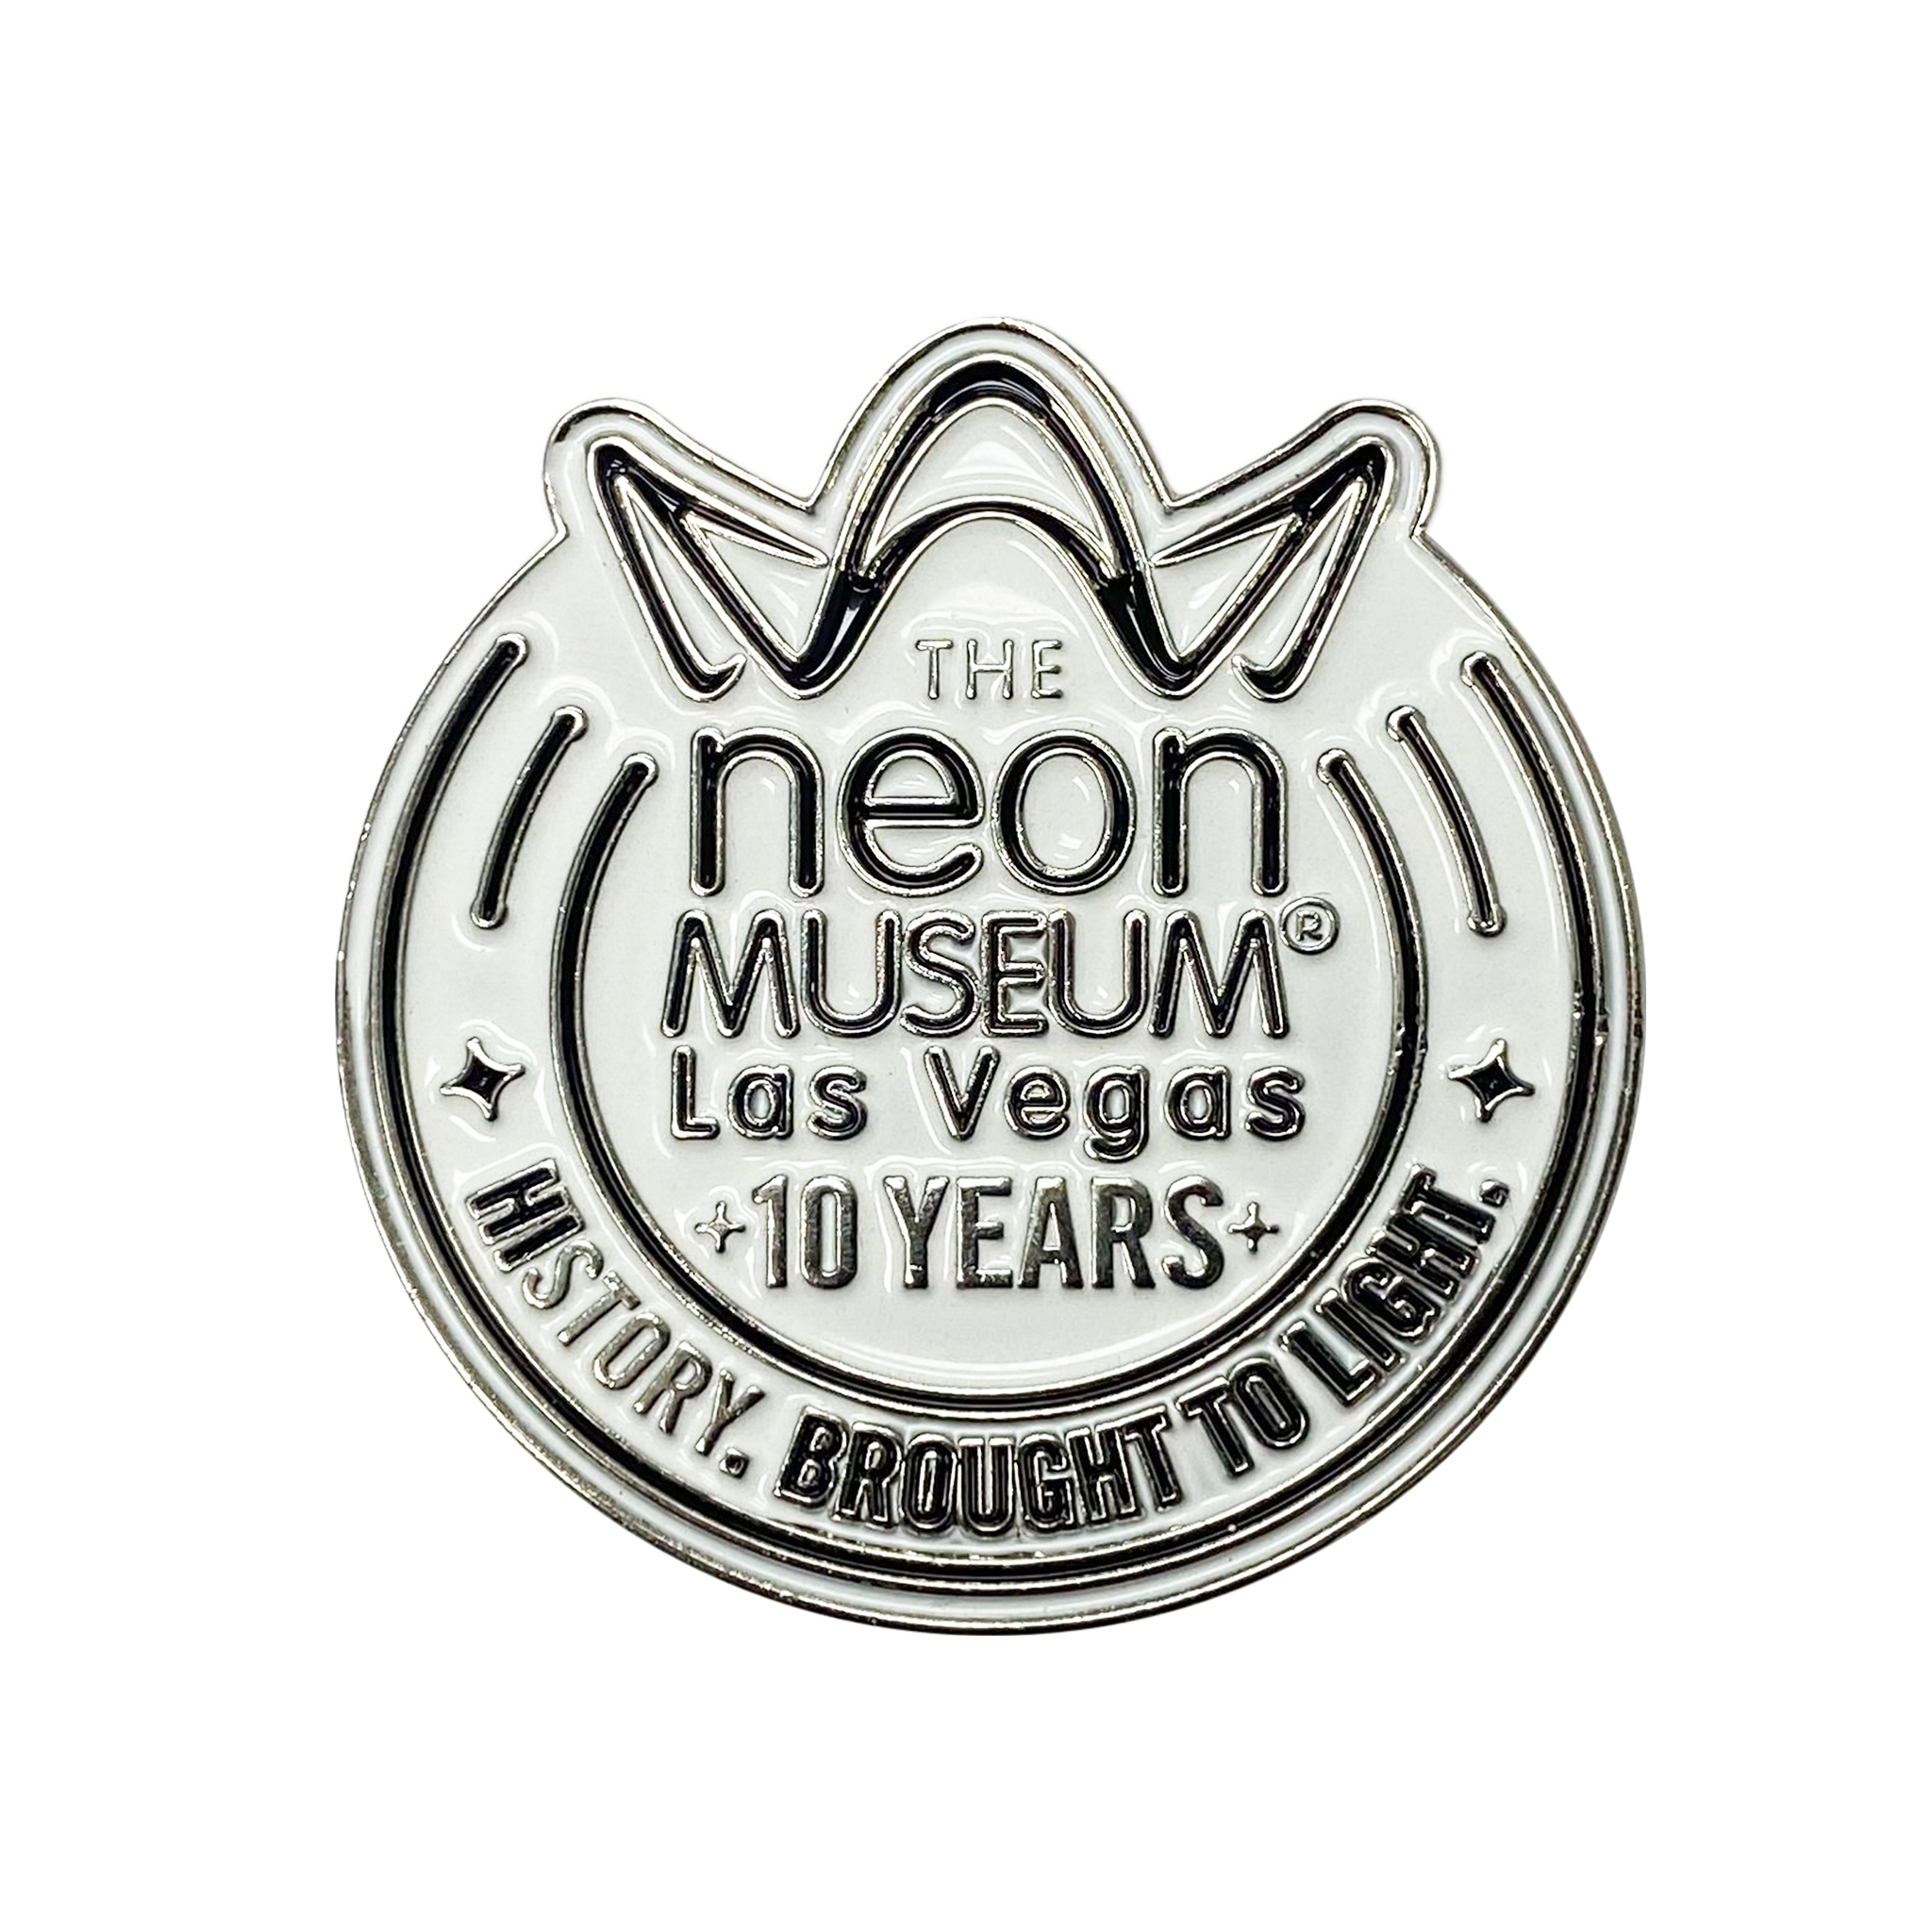 Vintage pins production emblems By Netkoff